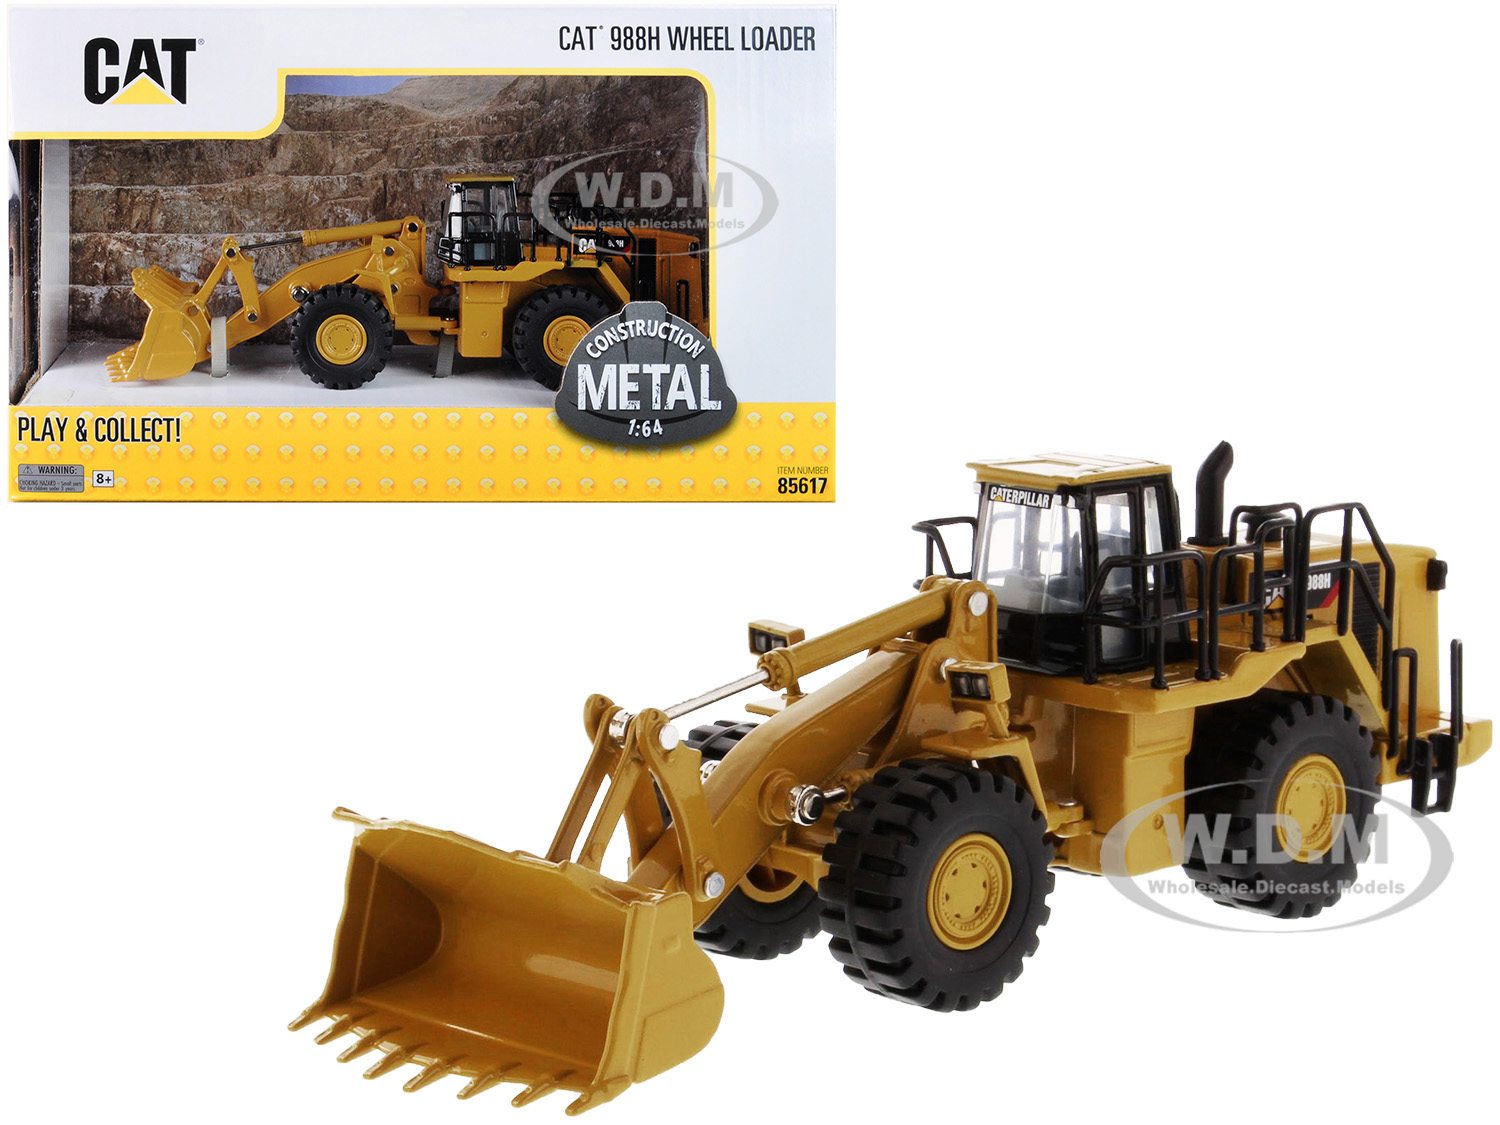 Cat Caterpillar 988h Wheel Loader "play & Collect" Series 1/64 Diecast Model By Diecast Masters